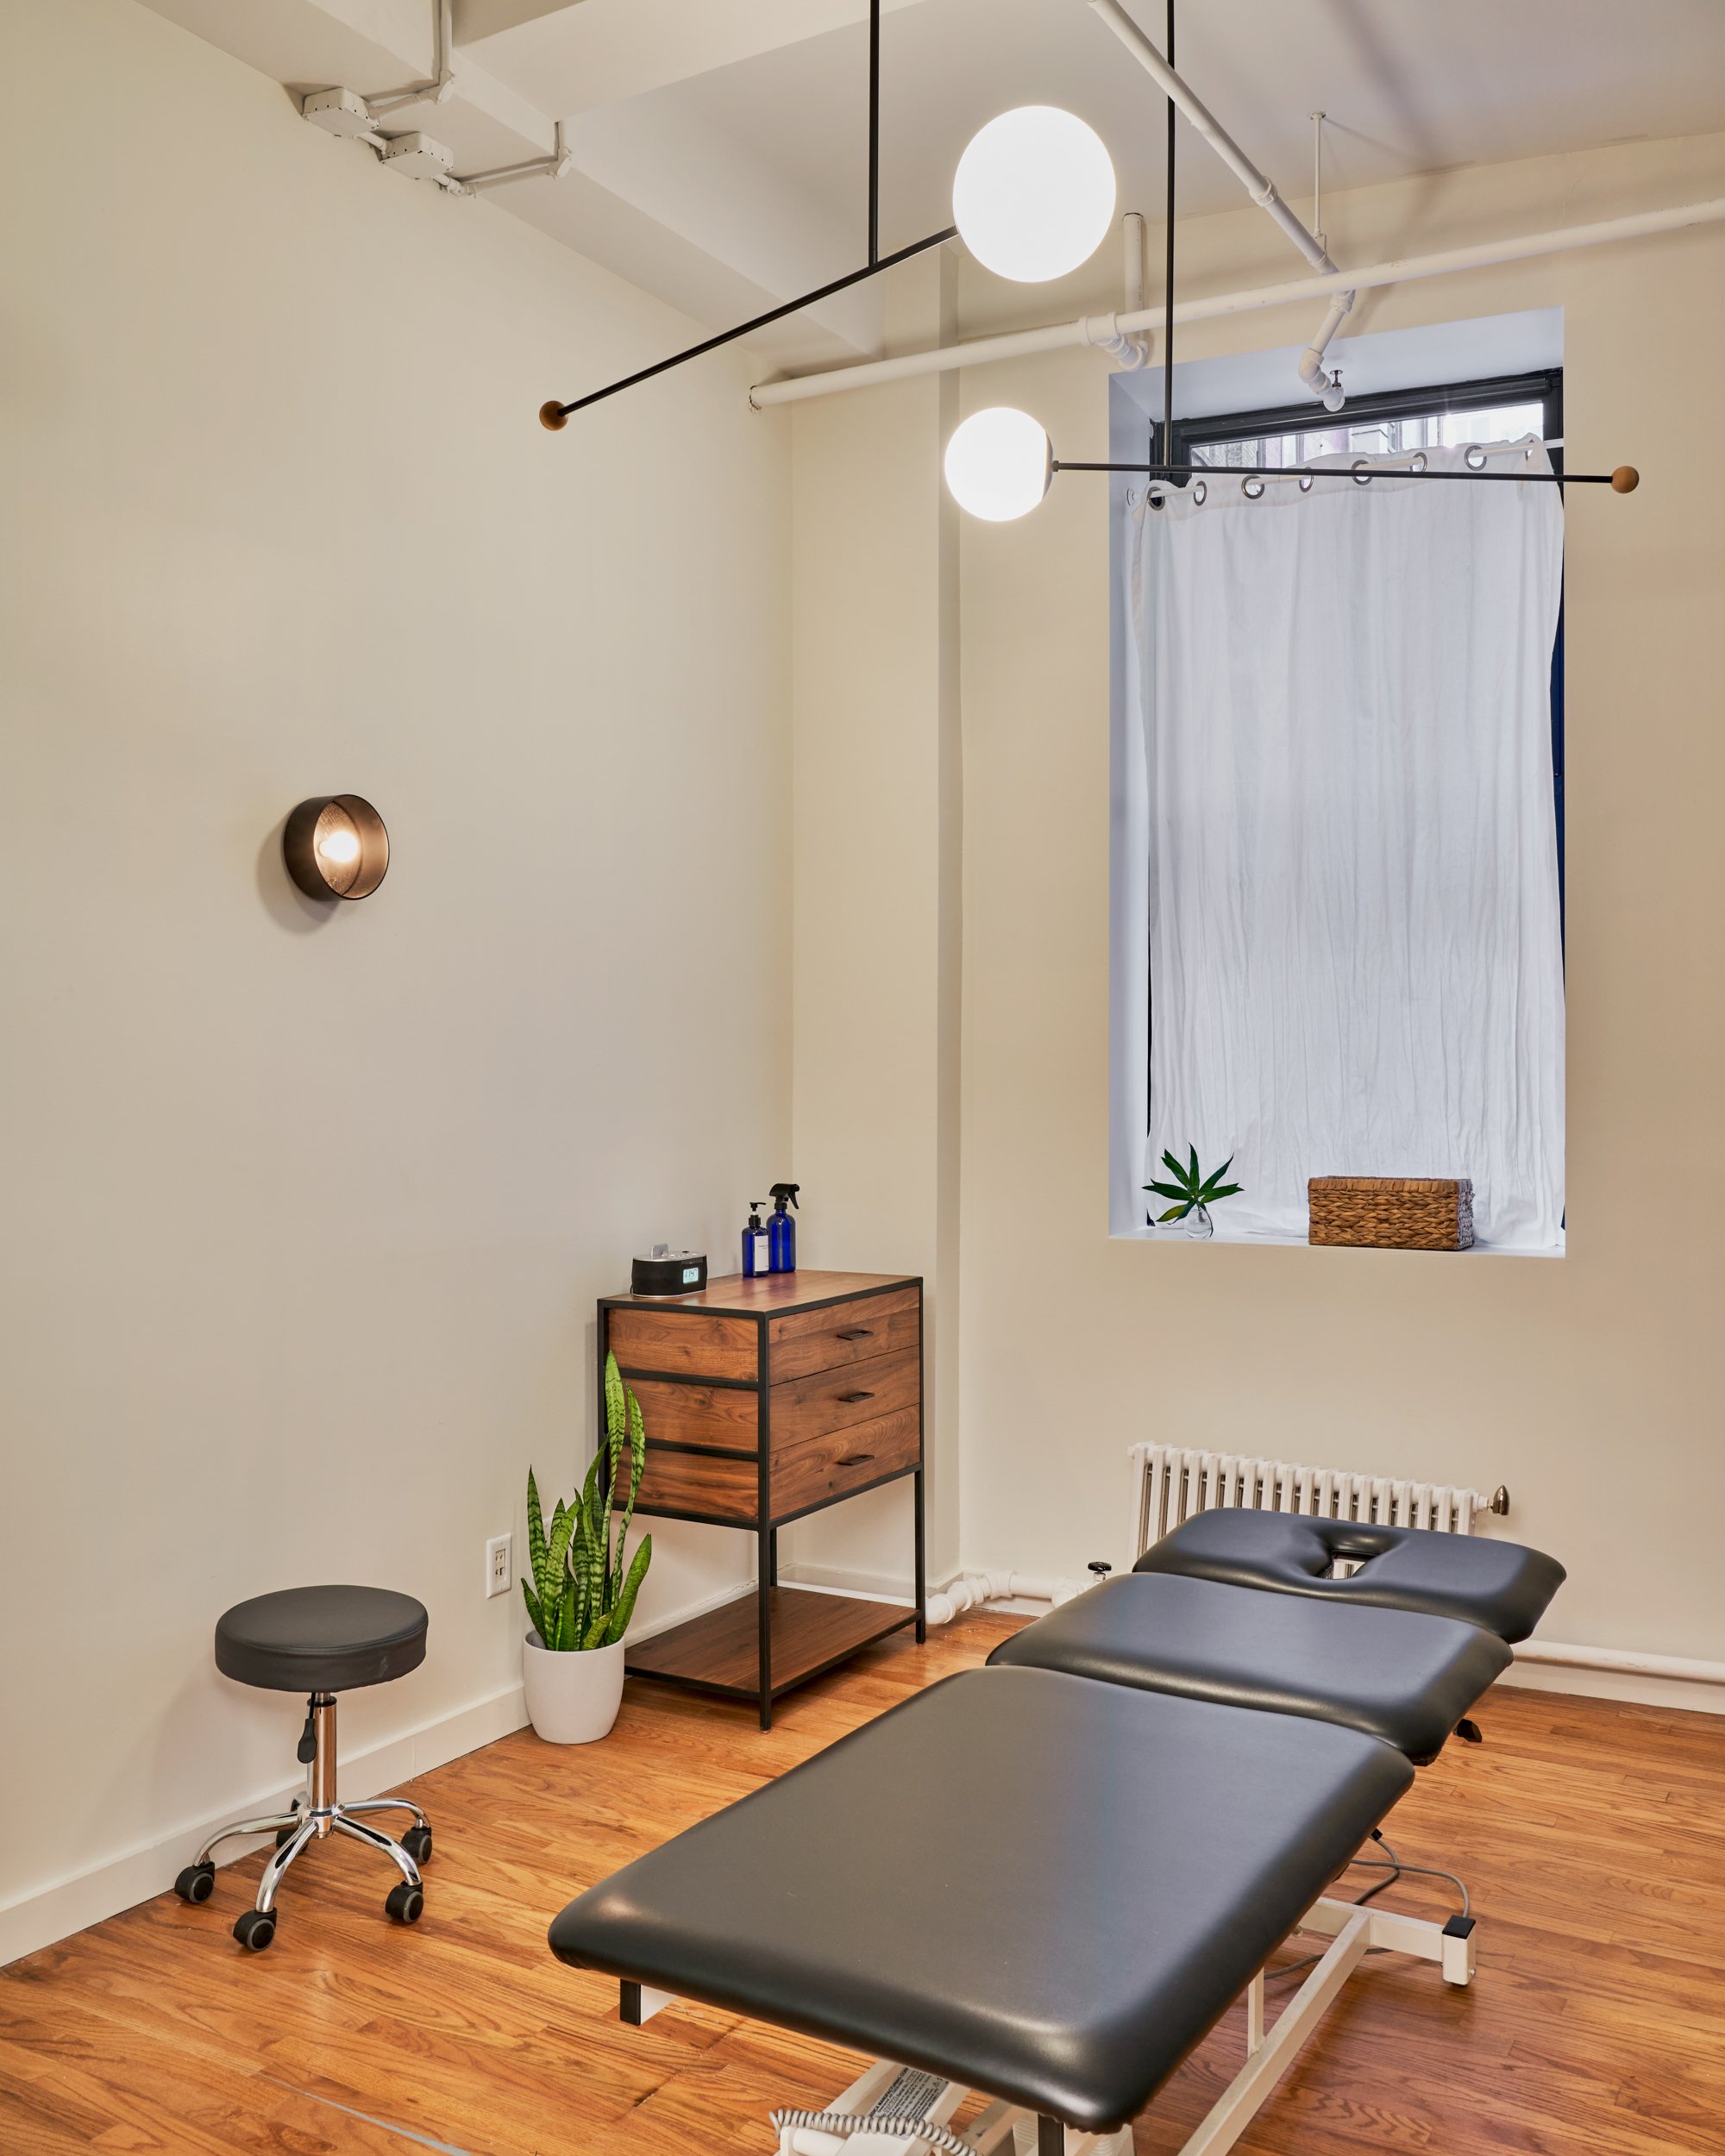 How to start a private physical therapy practice